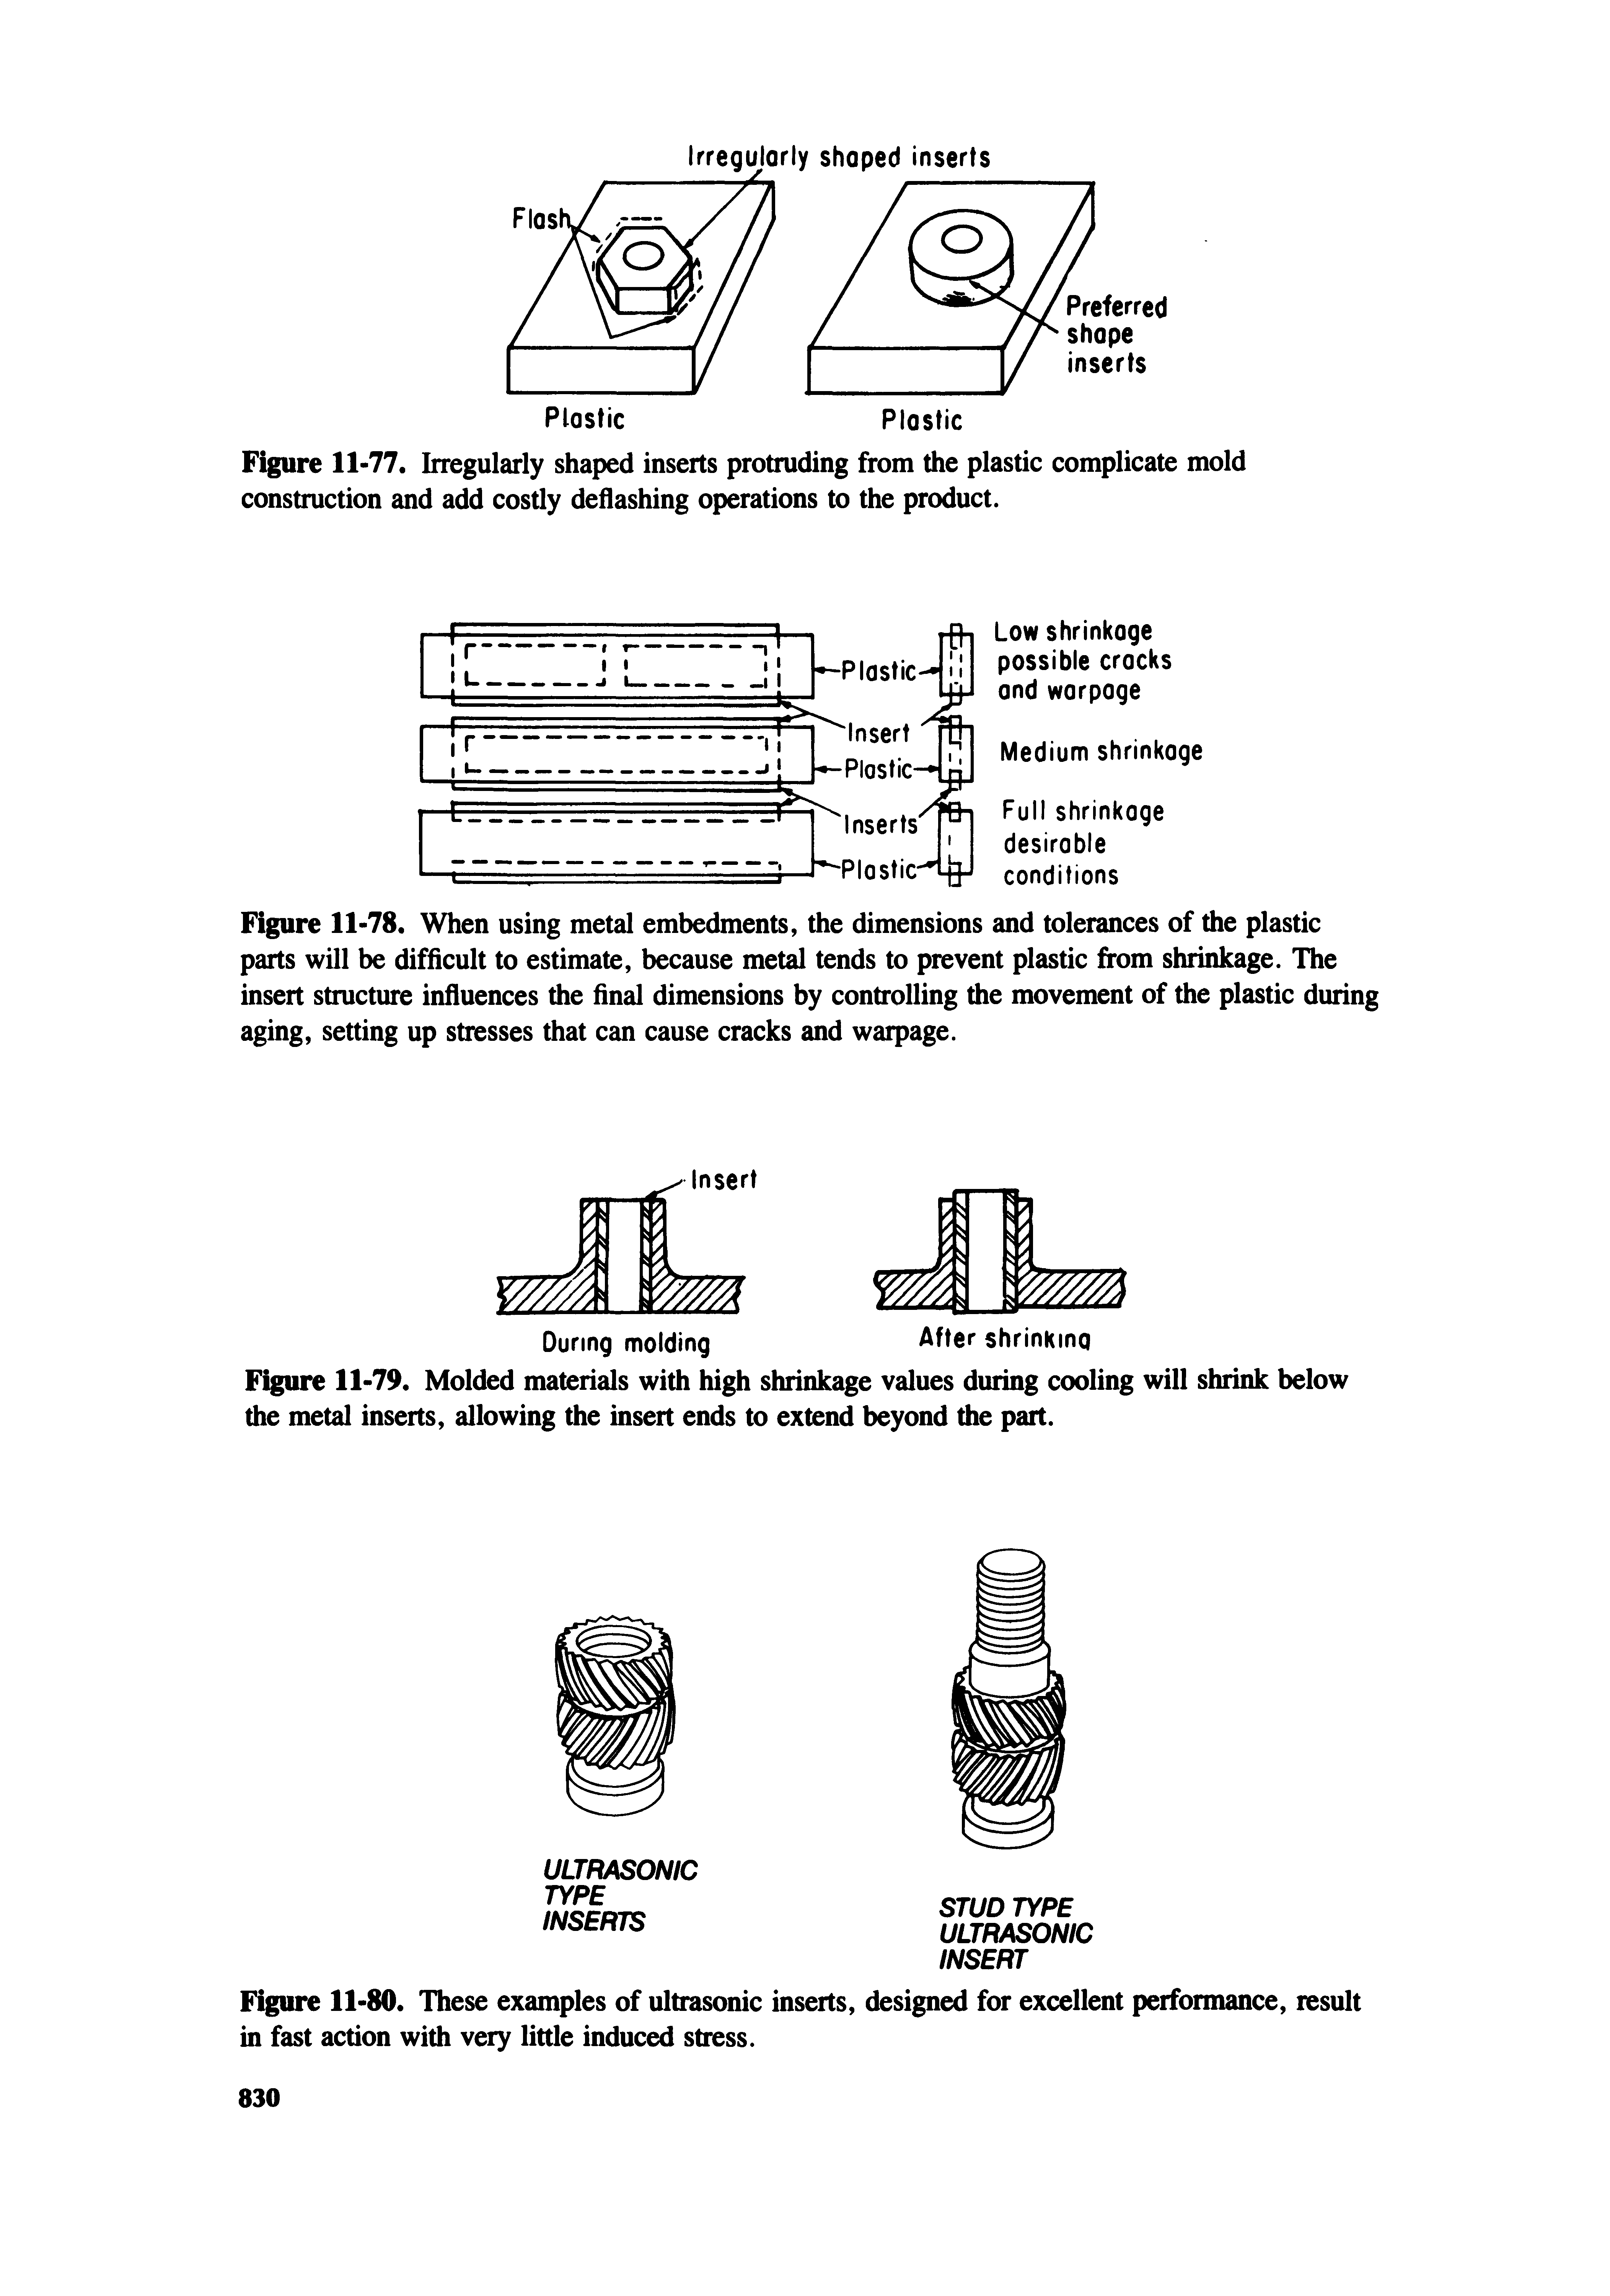 Figure 11-80. These examples of ultrasonic inserts, designed for excellent performance, result in fast action with very little induced stress.